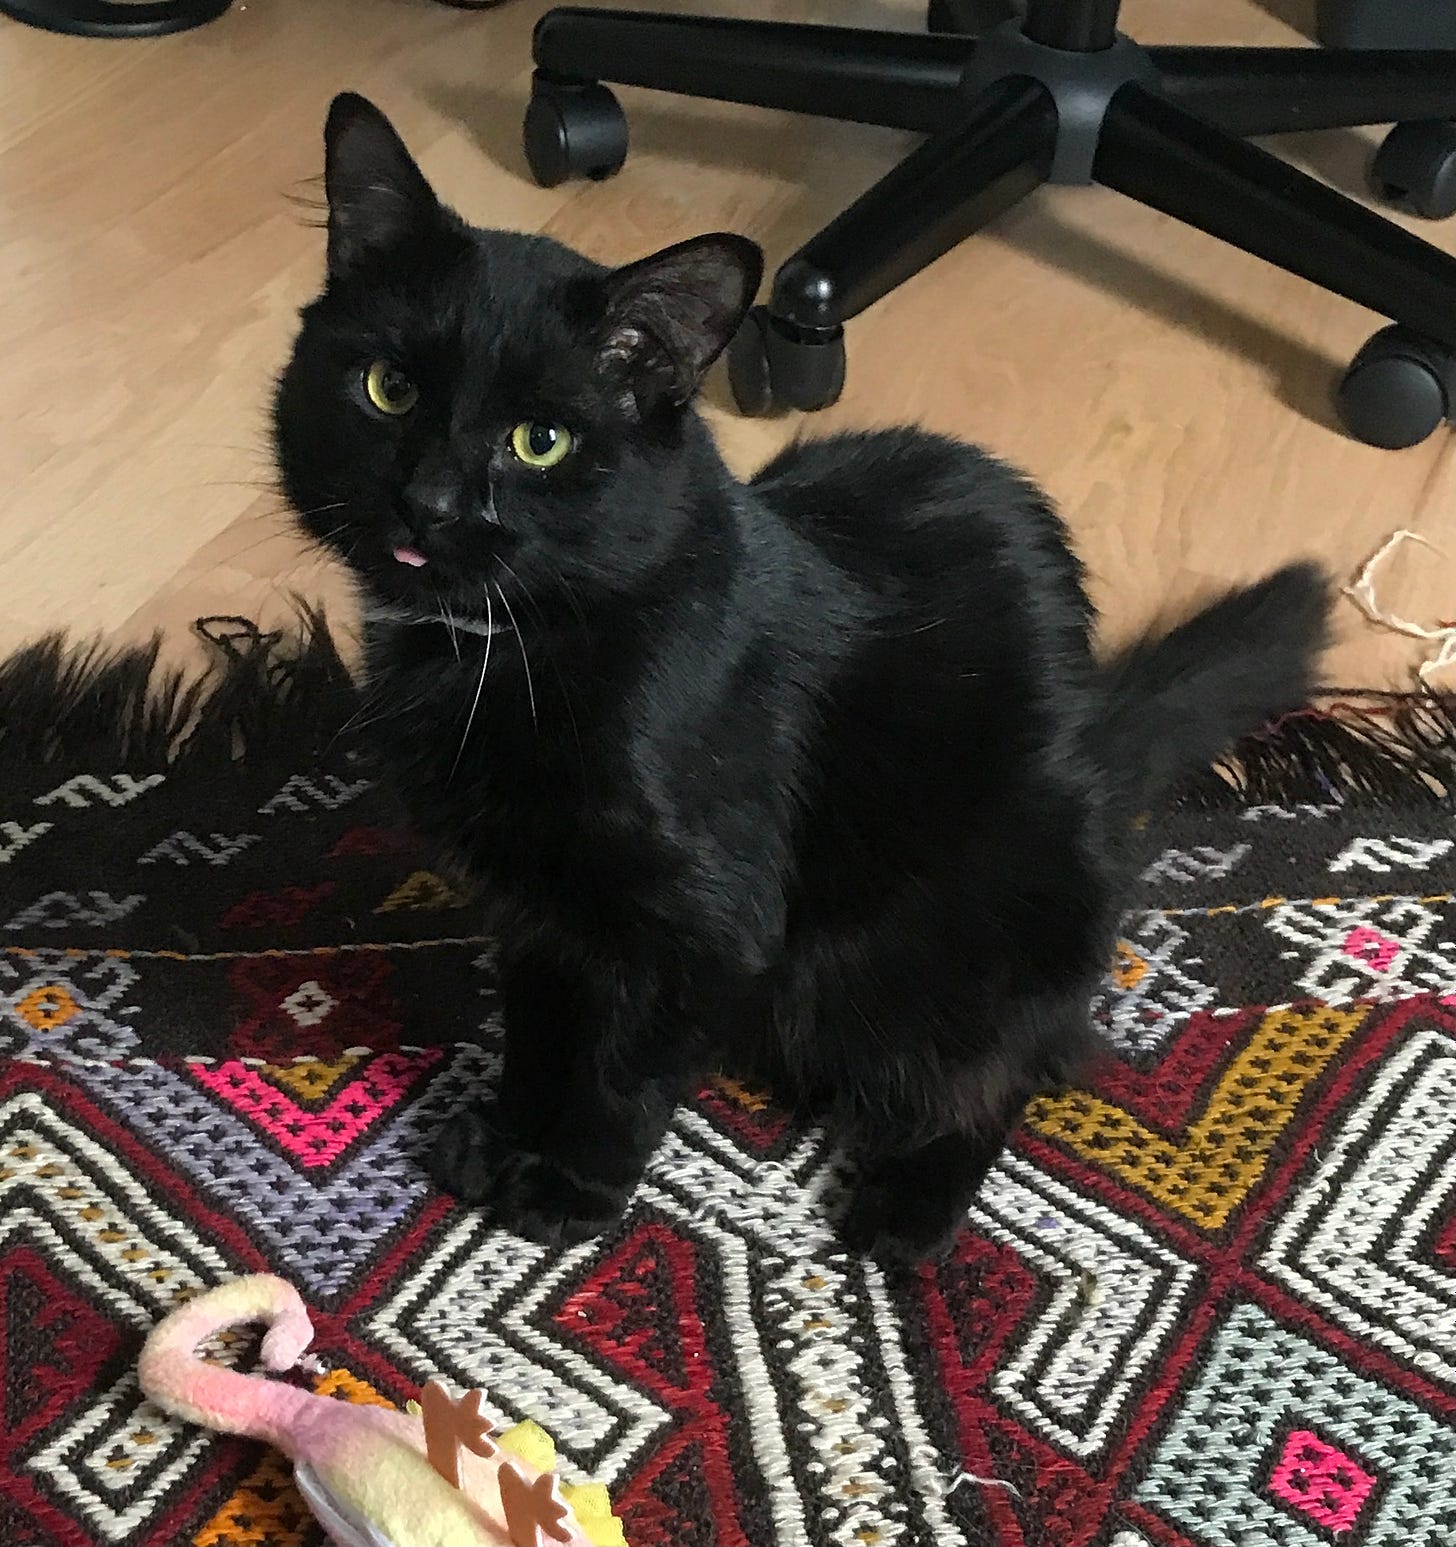 A black cat sits on a patterned rug. The cat's little tongue is sticking out and the cat has green eyes.